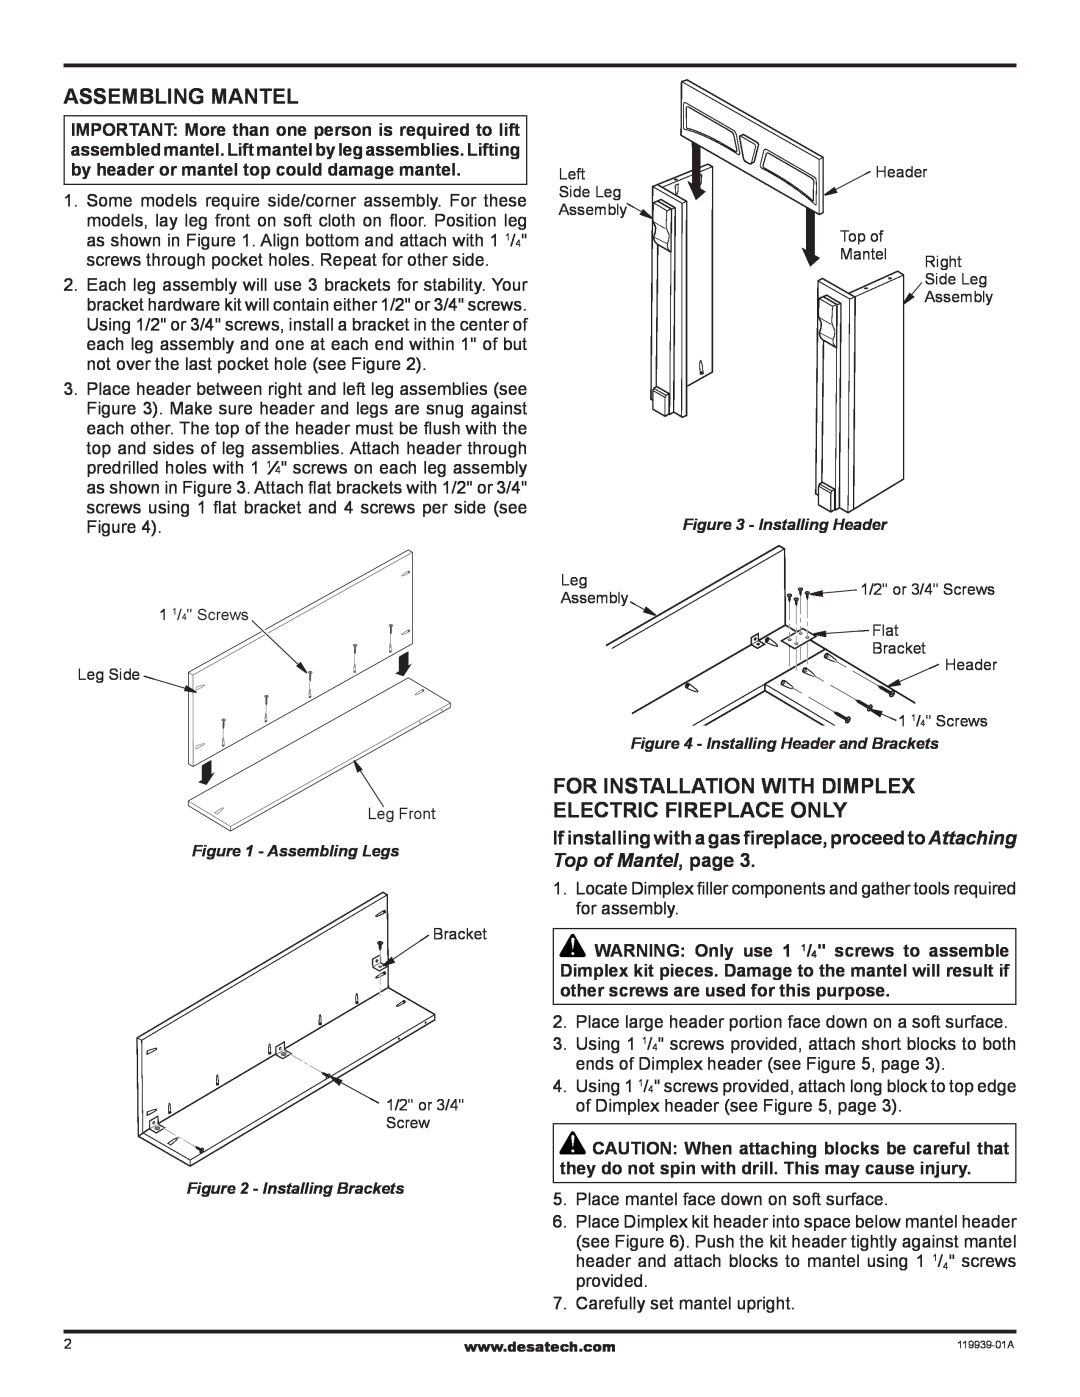 Desa W32WP installation instructions Assembling Mantel, For installation with dimplex electric fireplace only 